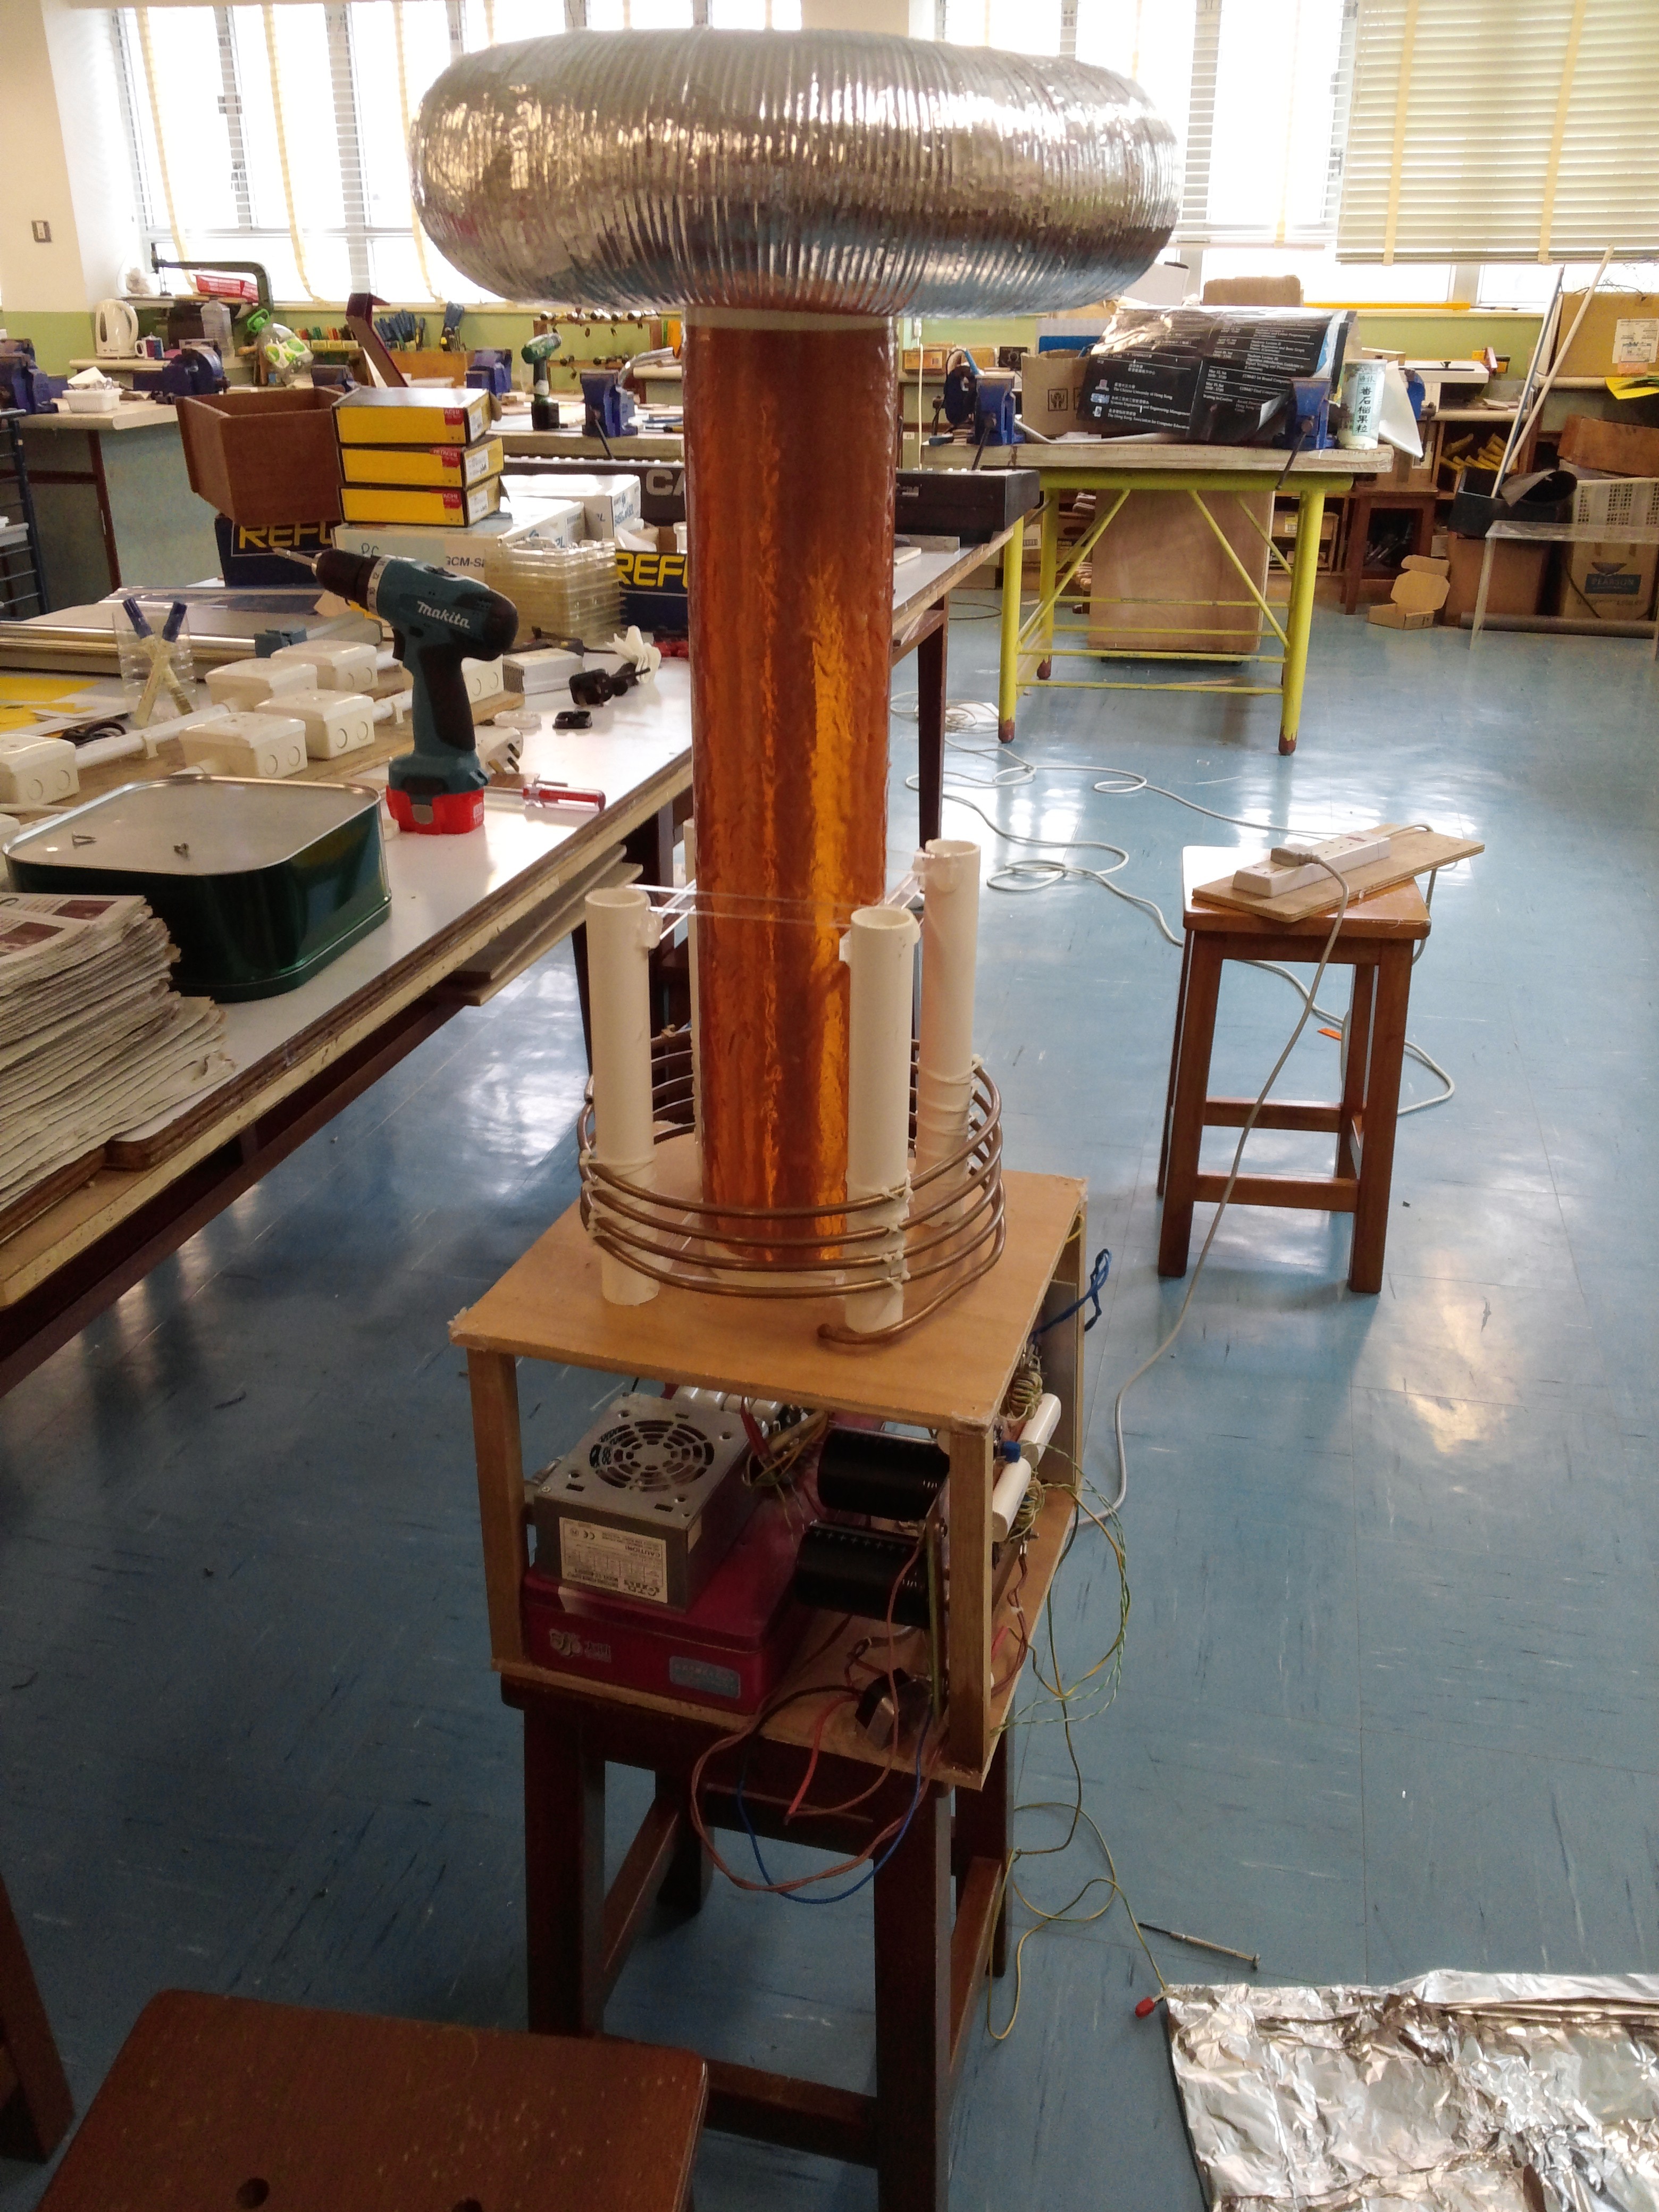 Tesla Coil - Completed